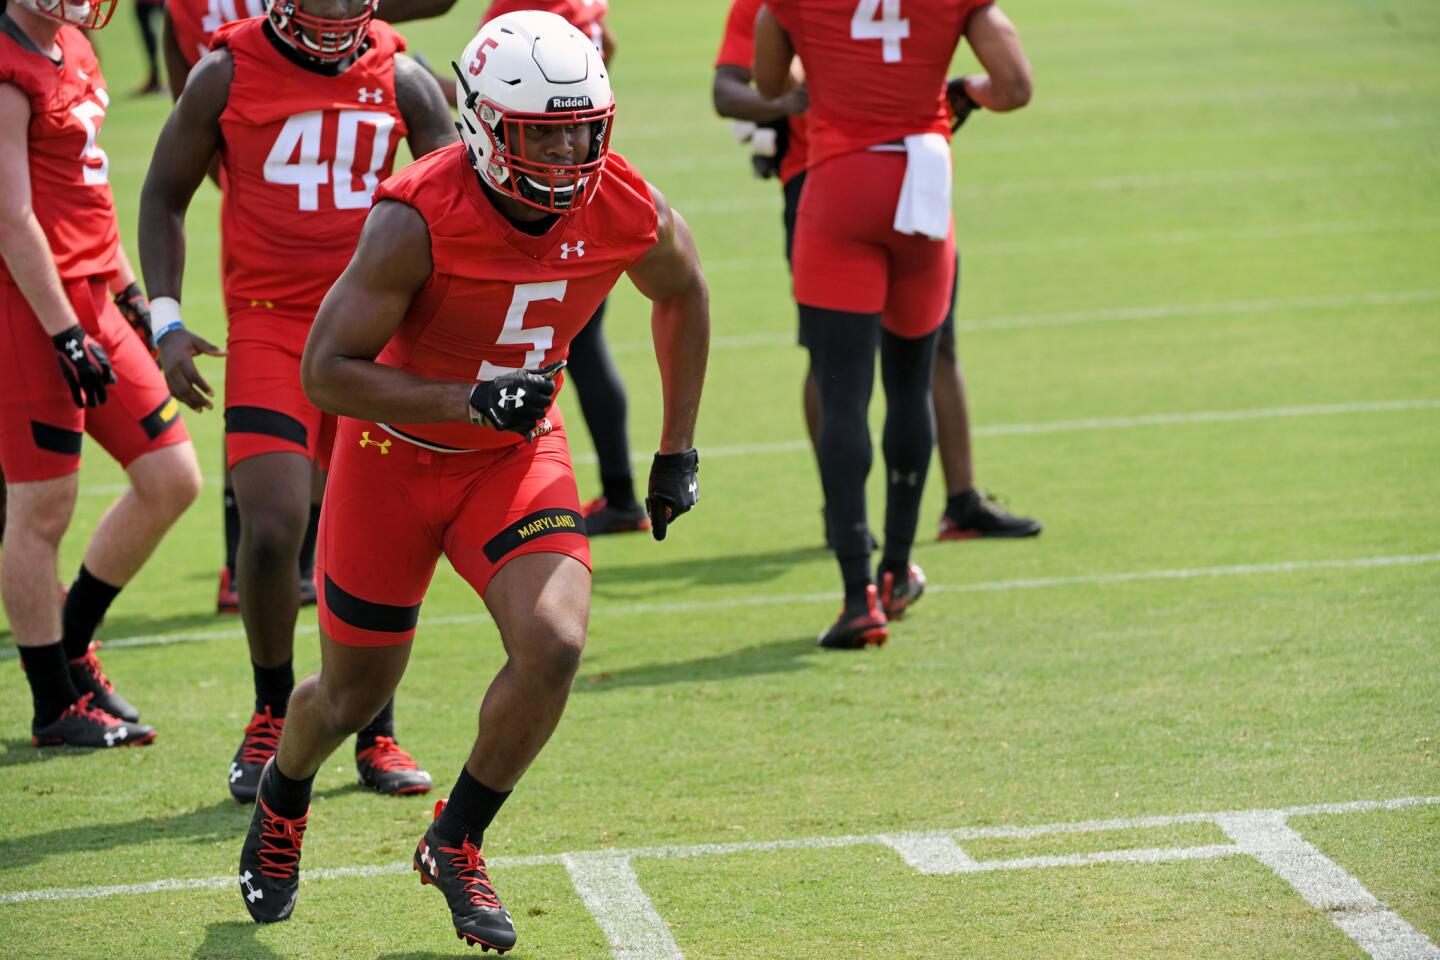 Shaq Smith, University of Maryland LB, during a drill at the Terps training camp on media day.